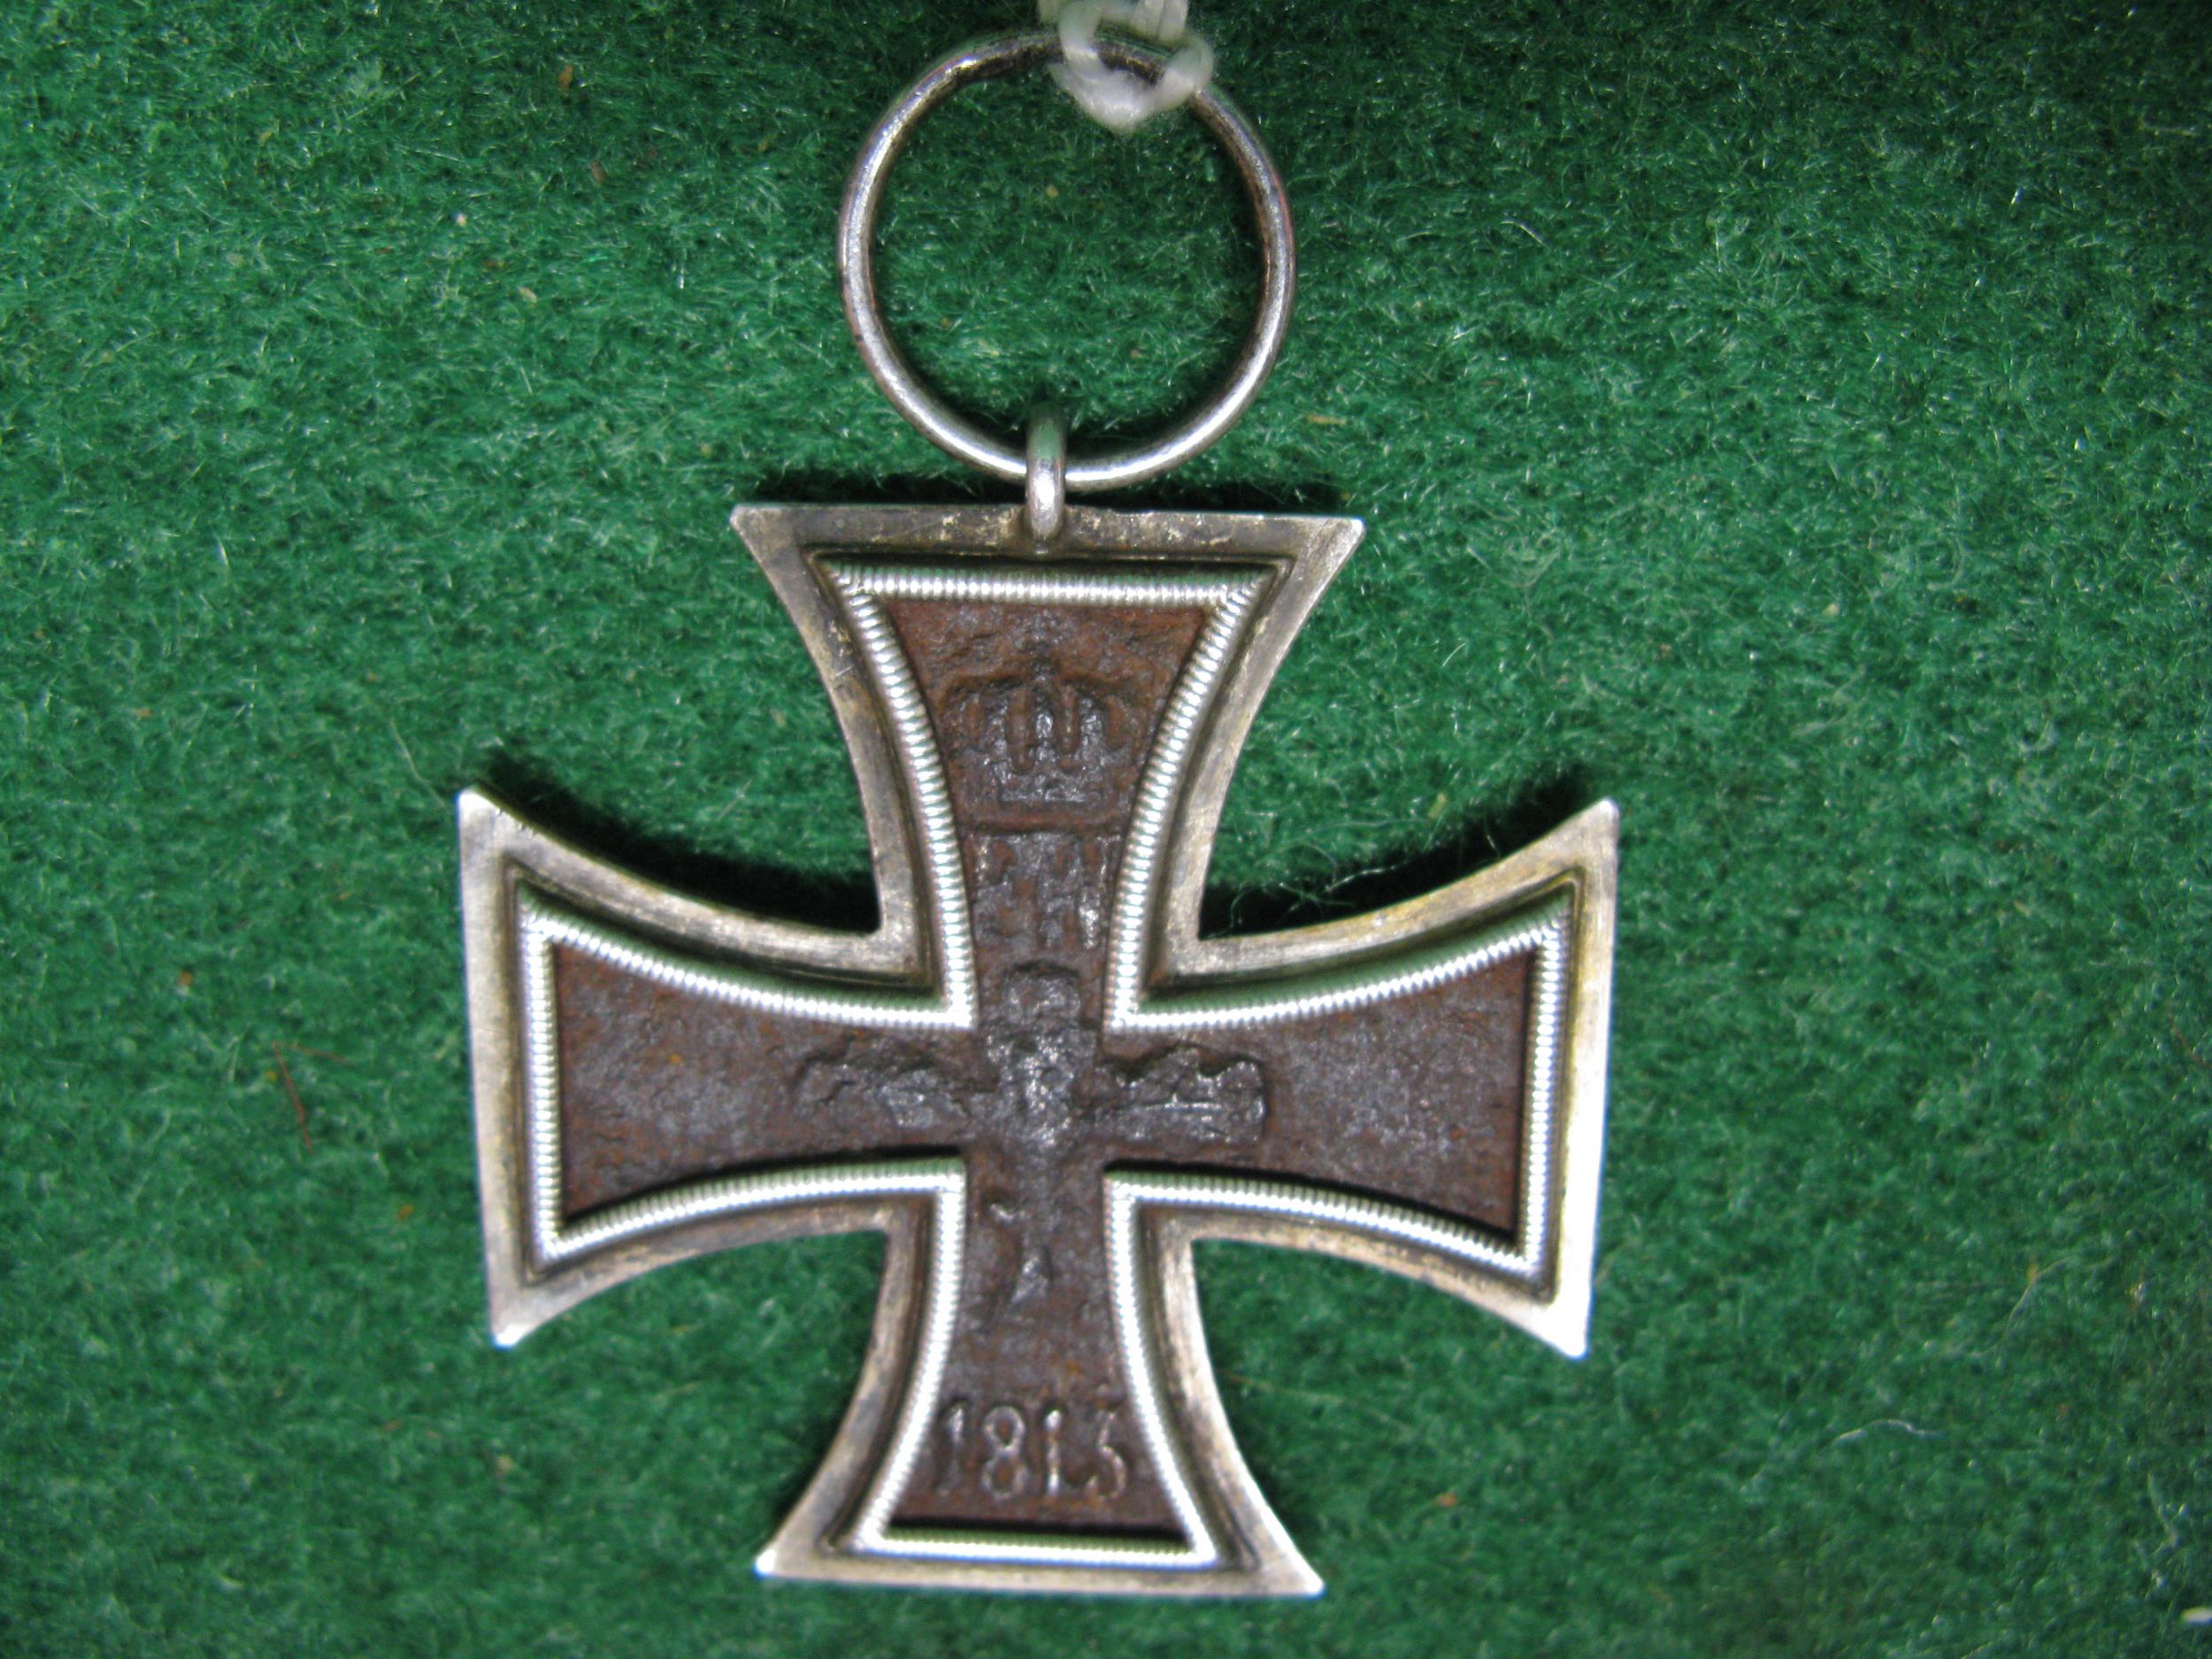 WWI battlefield relic German Military Cross with Crowns, W's and 1813 & 1914 embossed on either side - Image 2 of 3